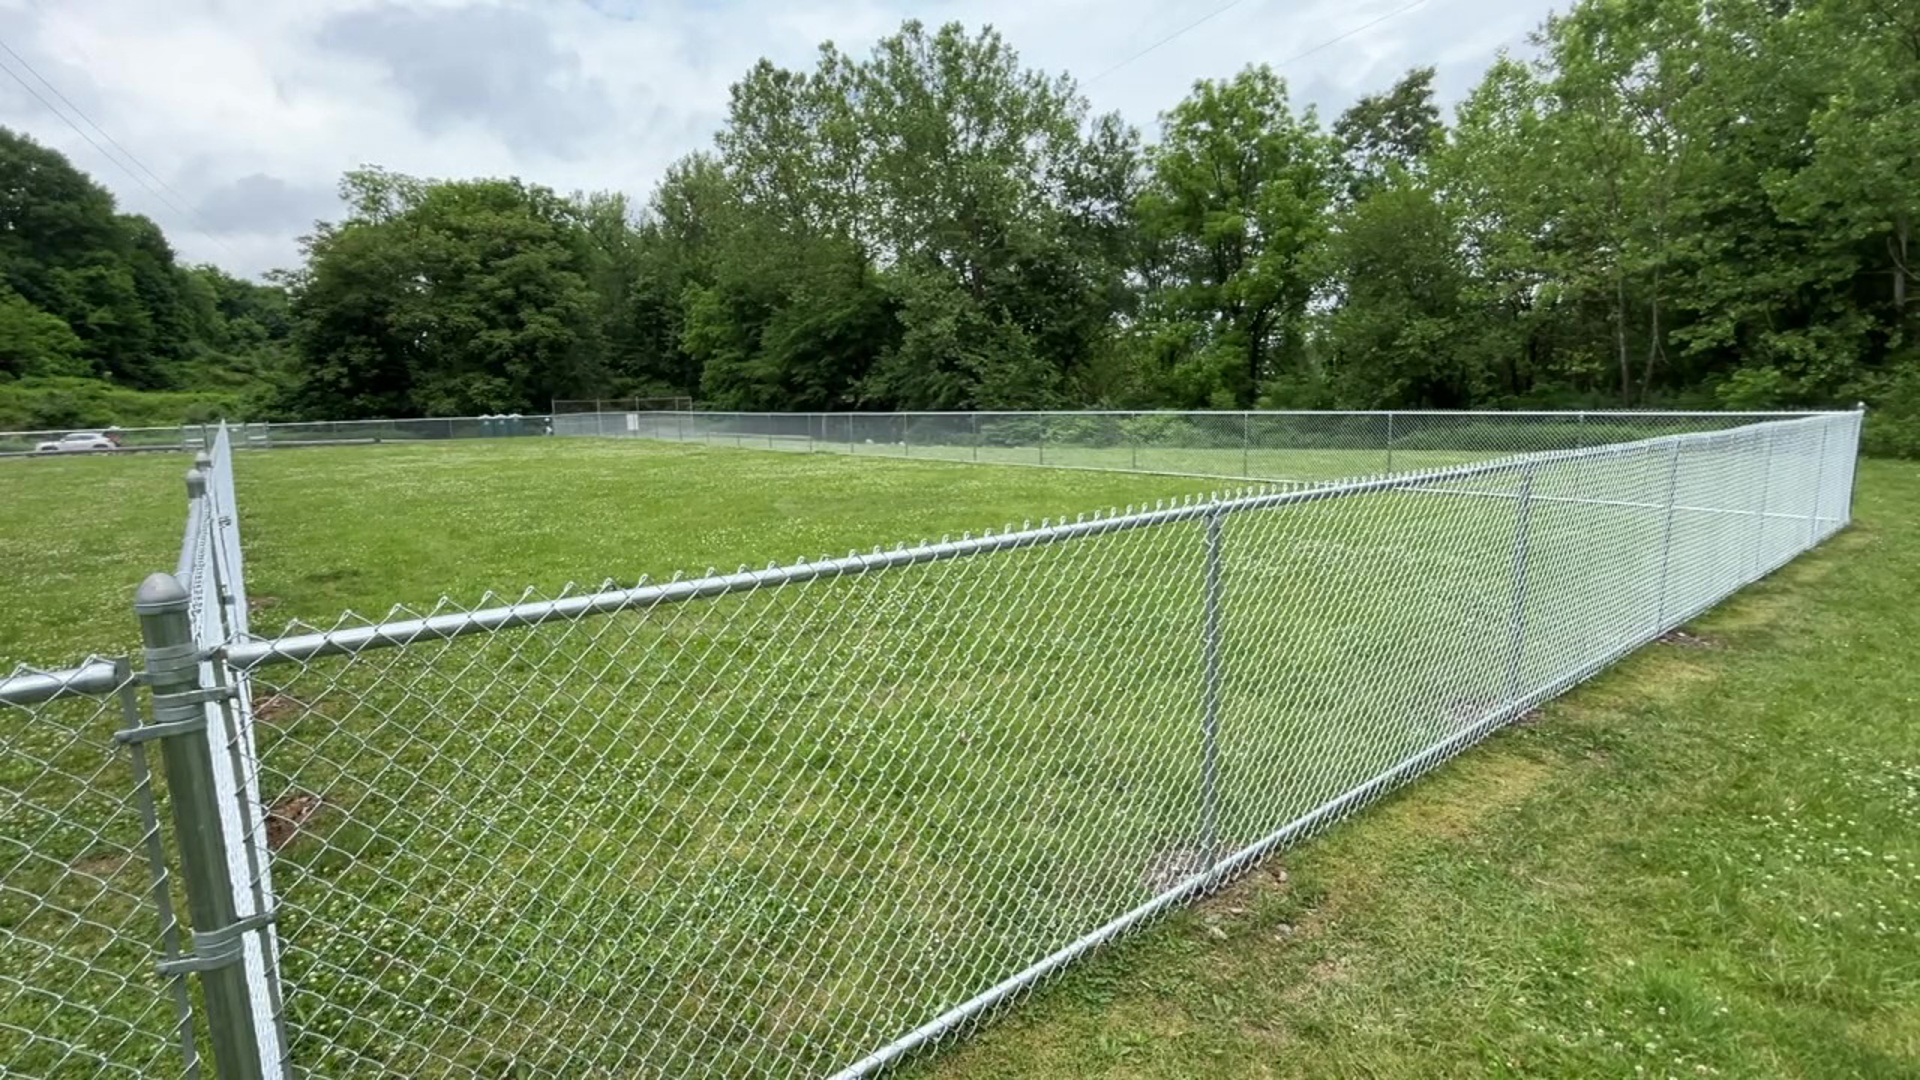 A new dog park in part of Monroe County may put the brakes on a bike race that draws people from across the country.